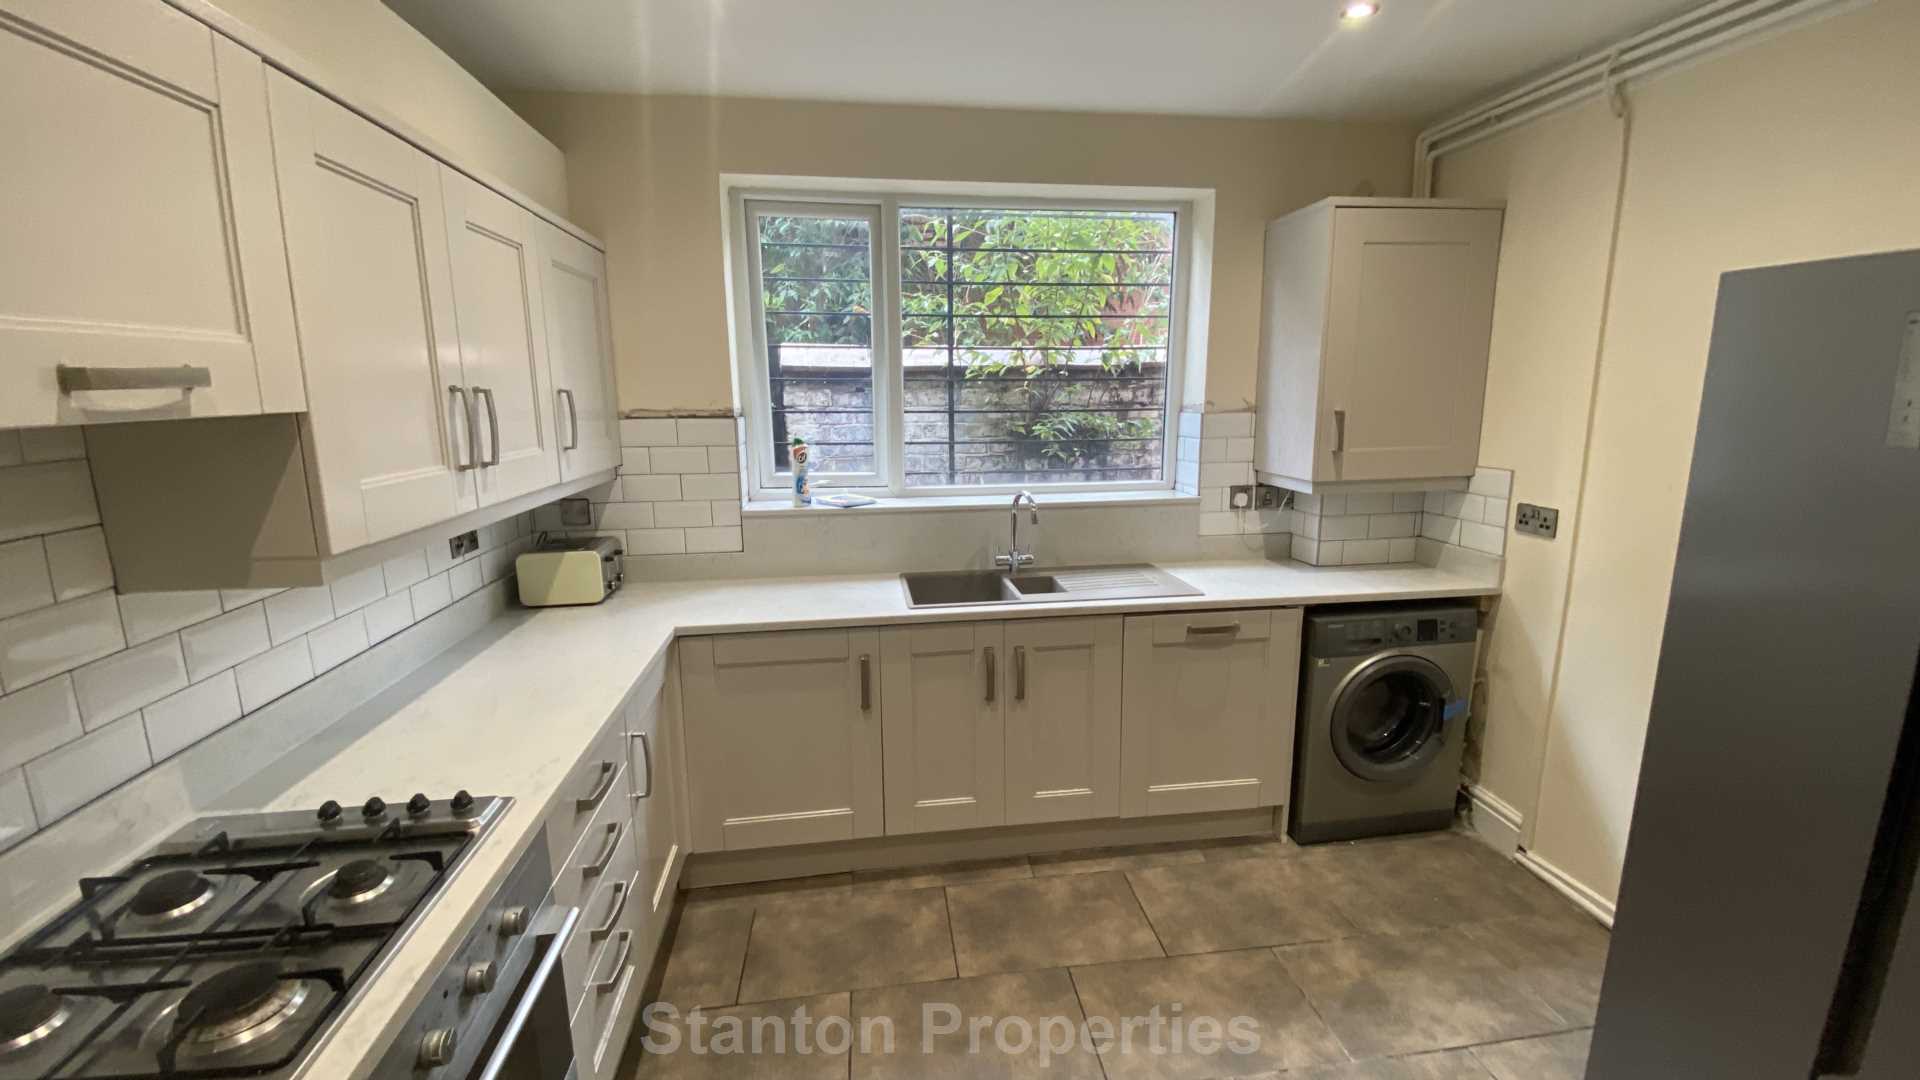 £130 pppw, Moseley Road, Fallowfield, M14 6NR, Image 2